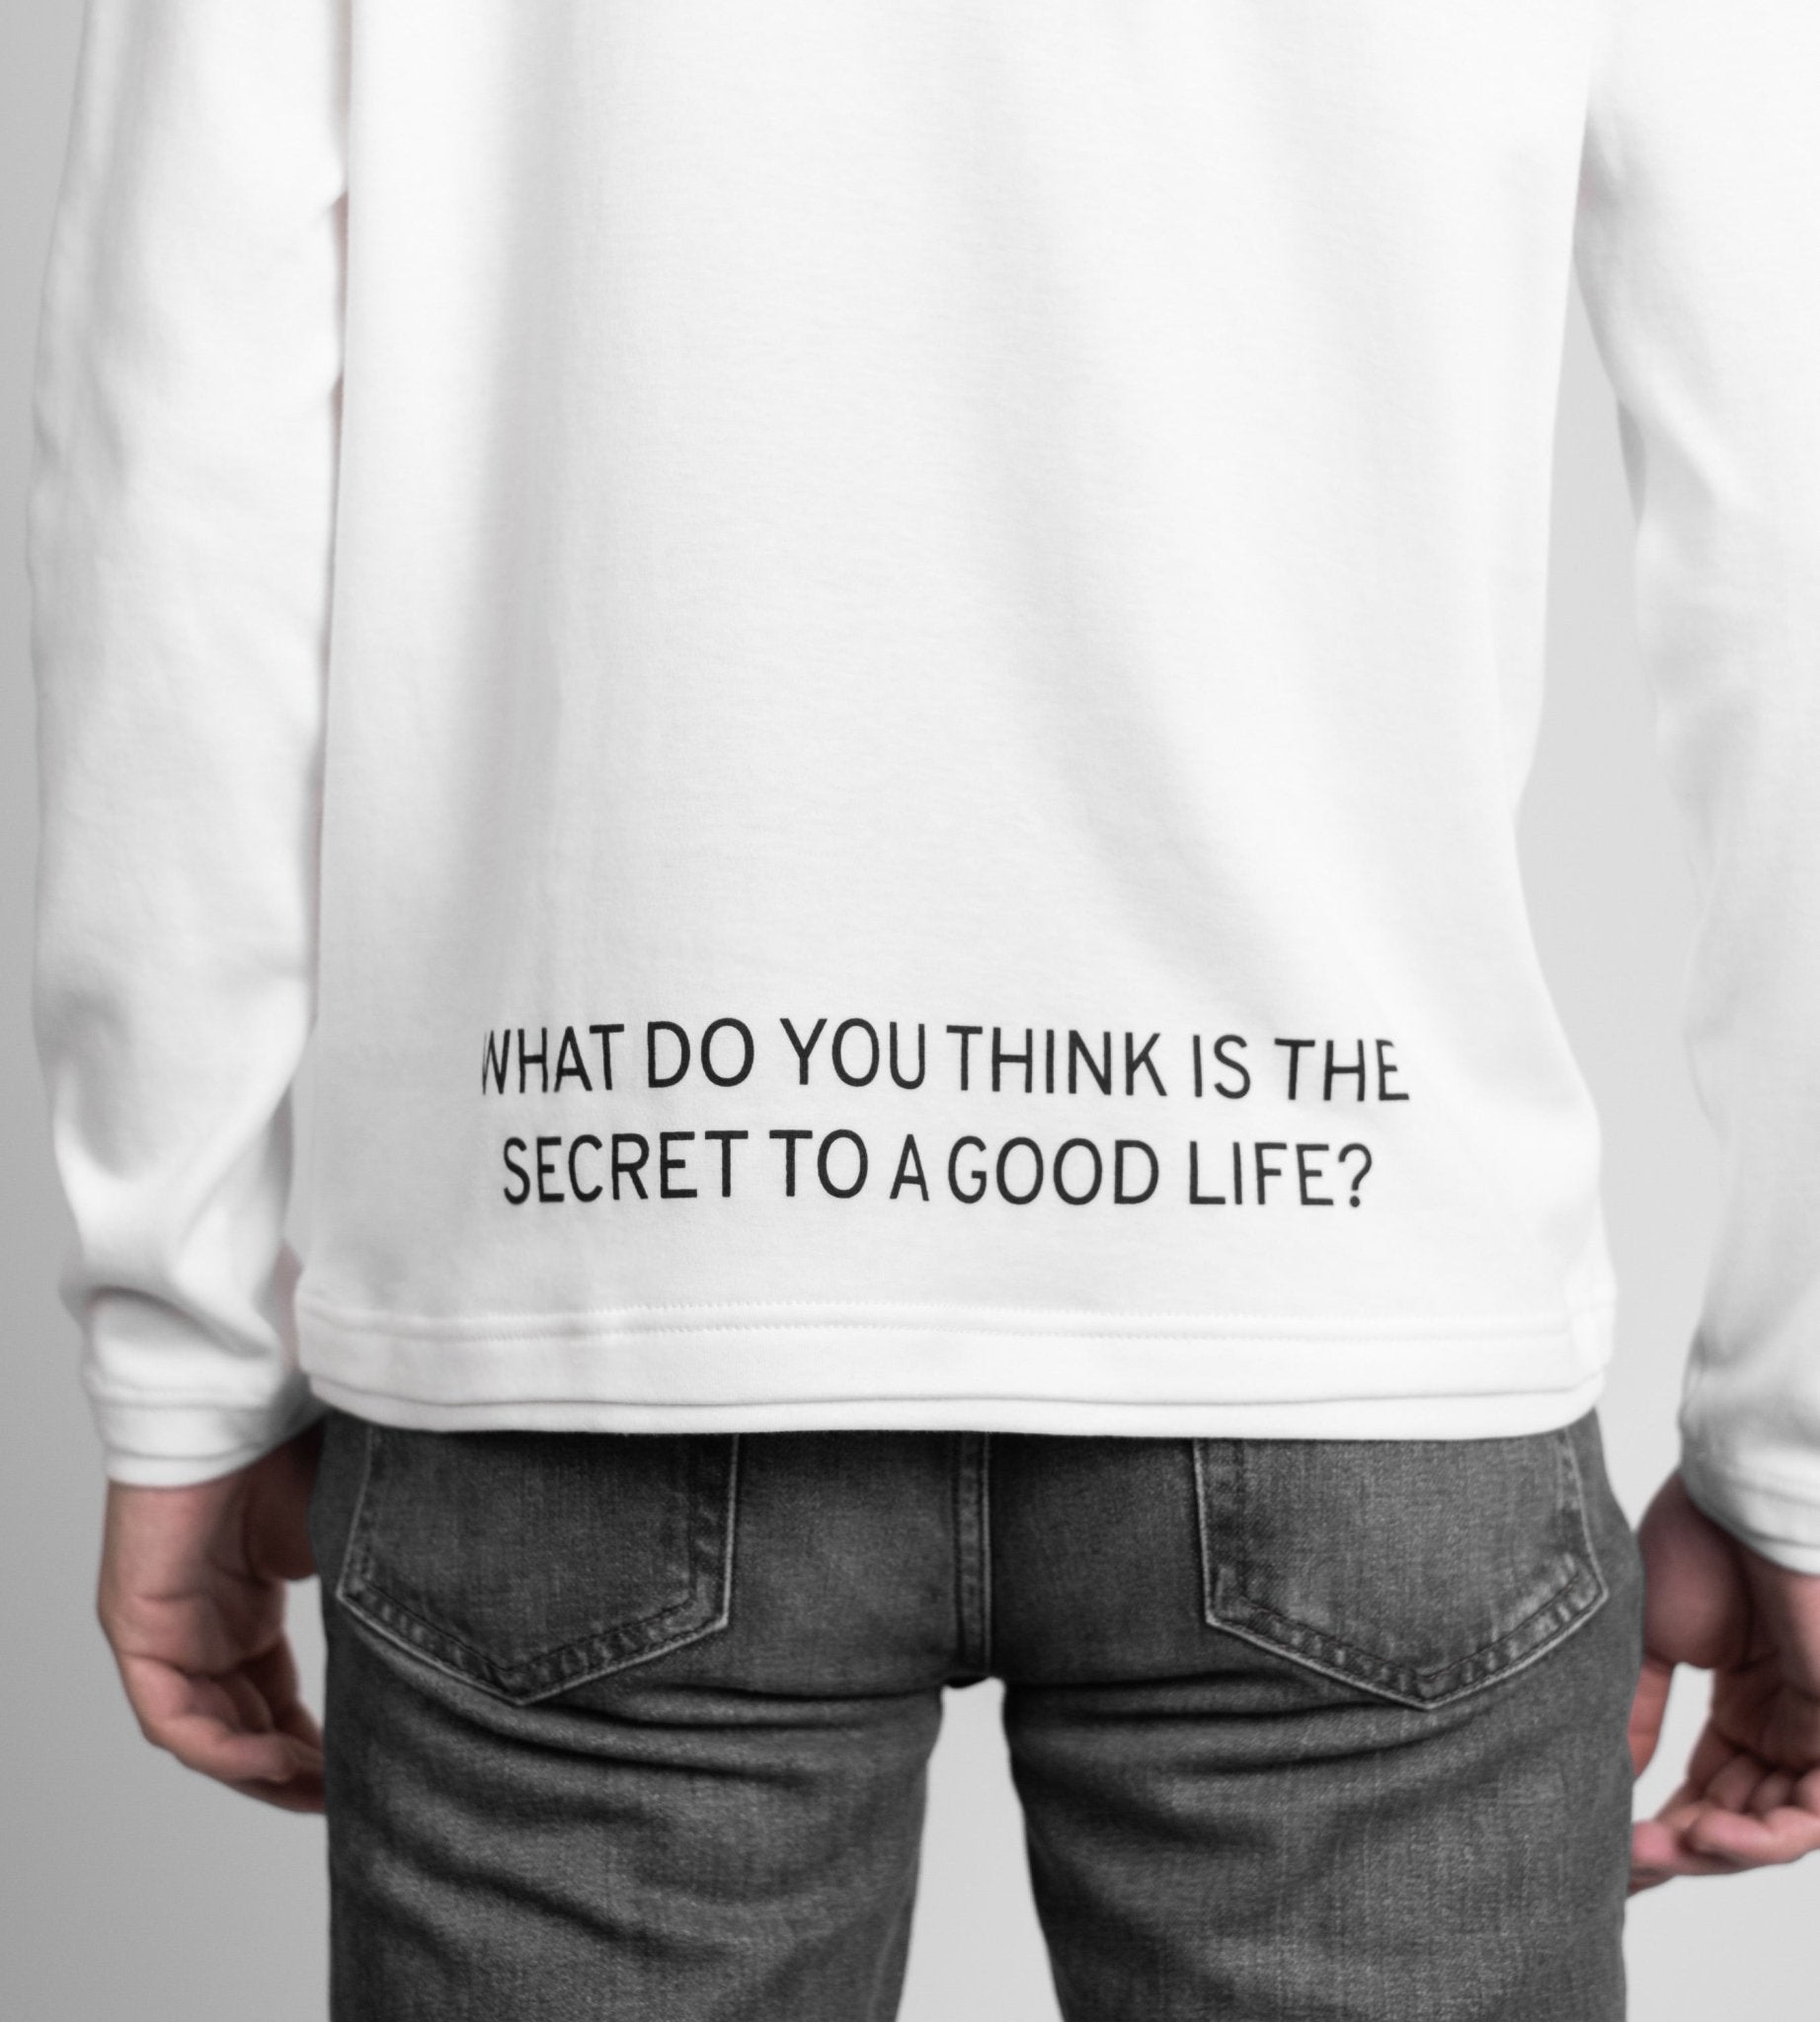 What do you think is the secret to a good life? - OBLIVIOUS?